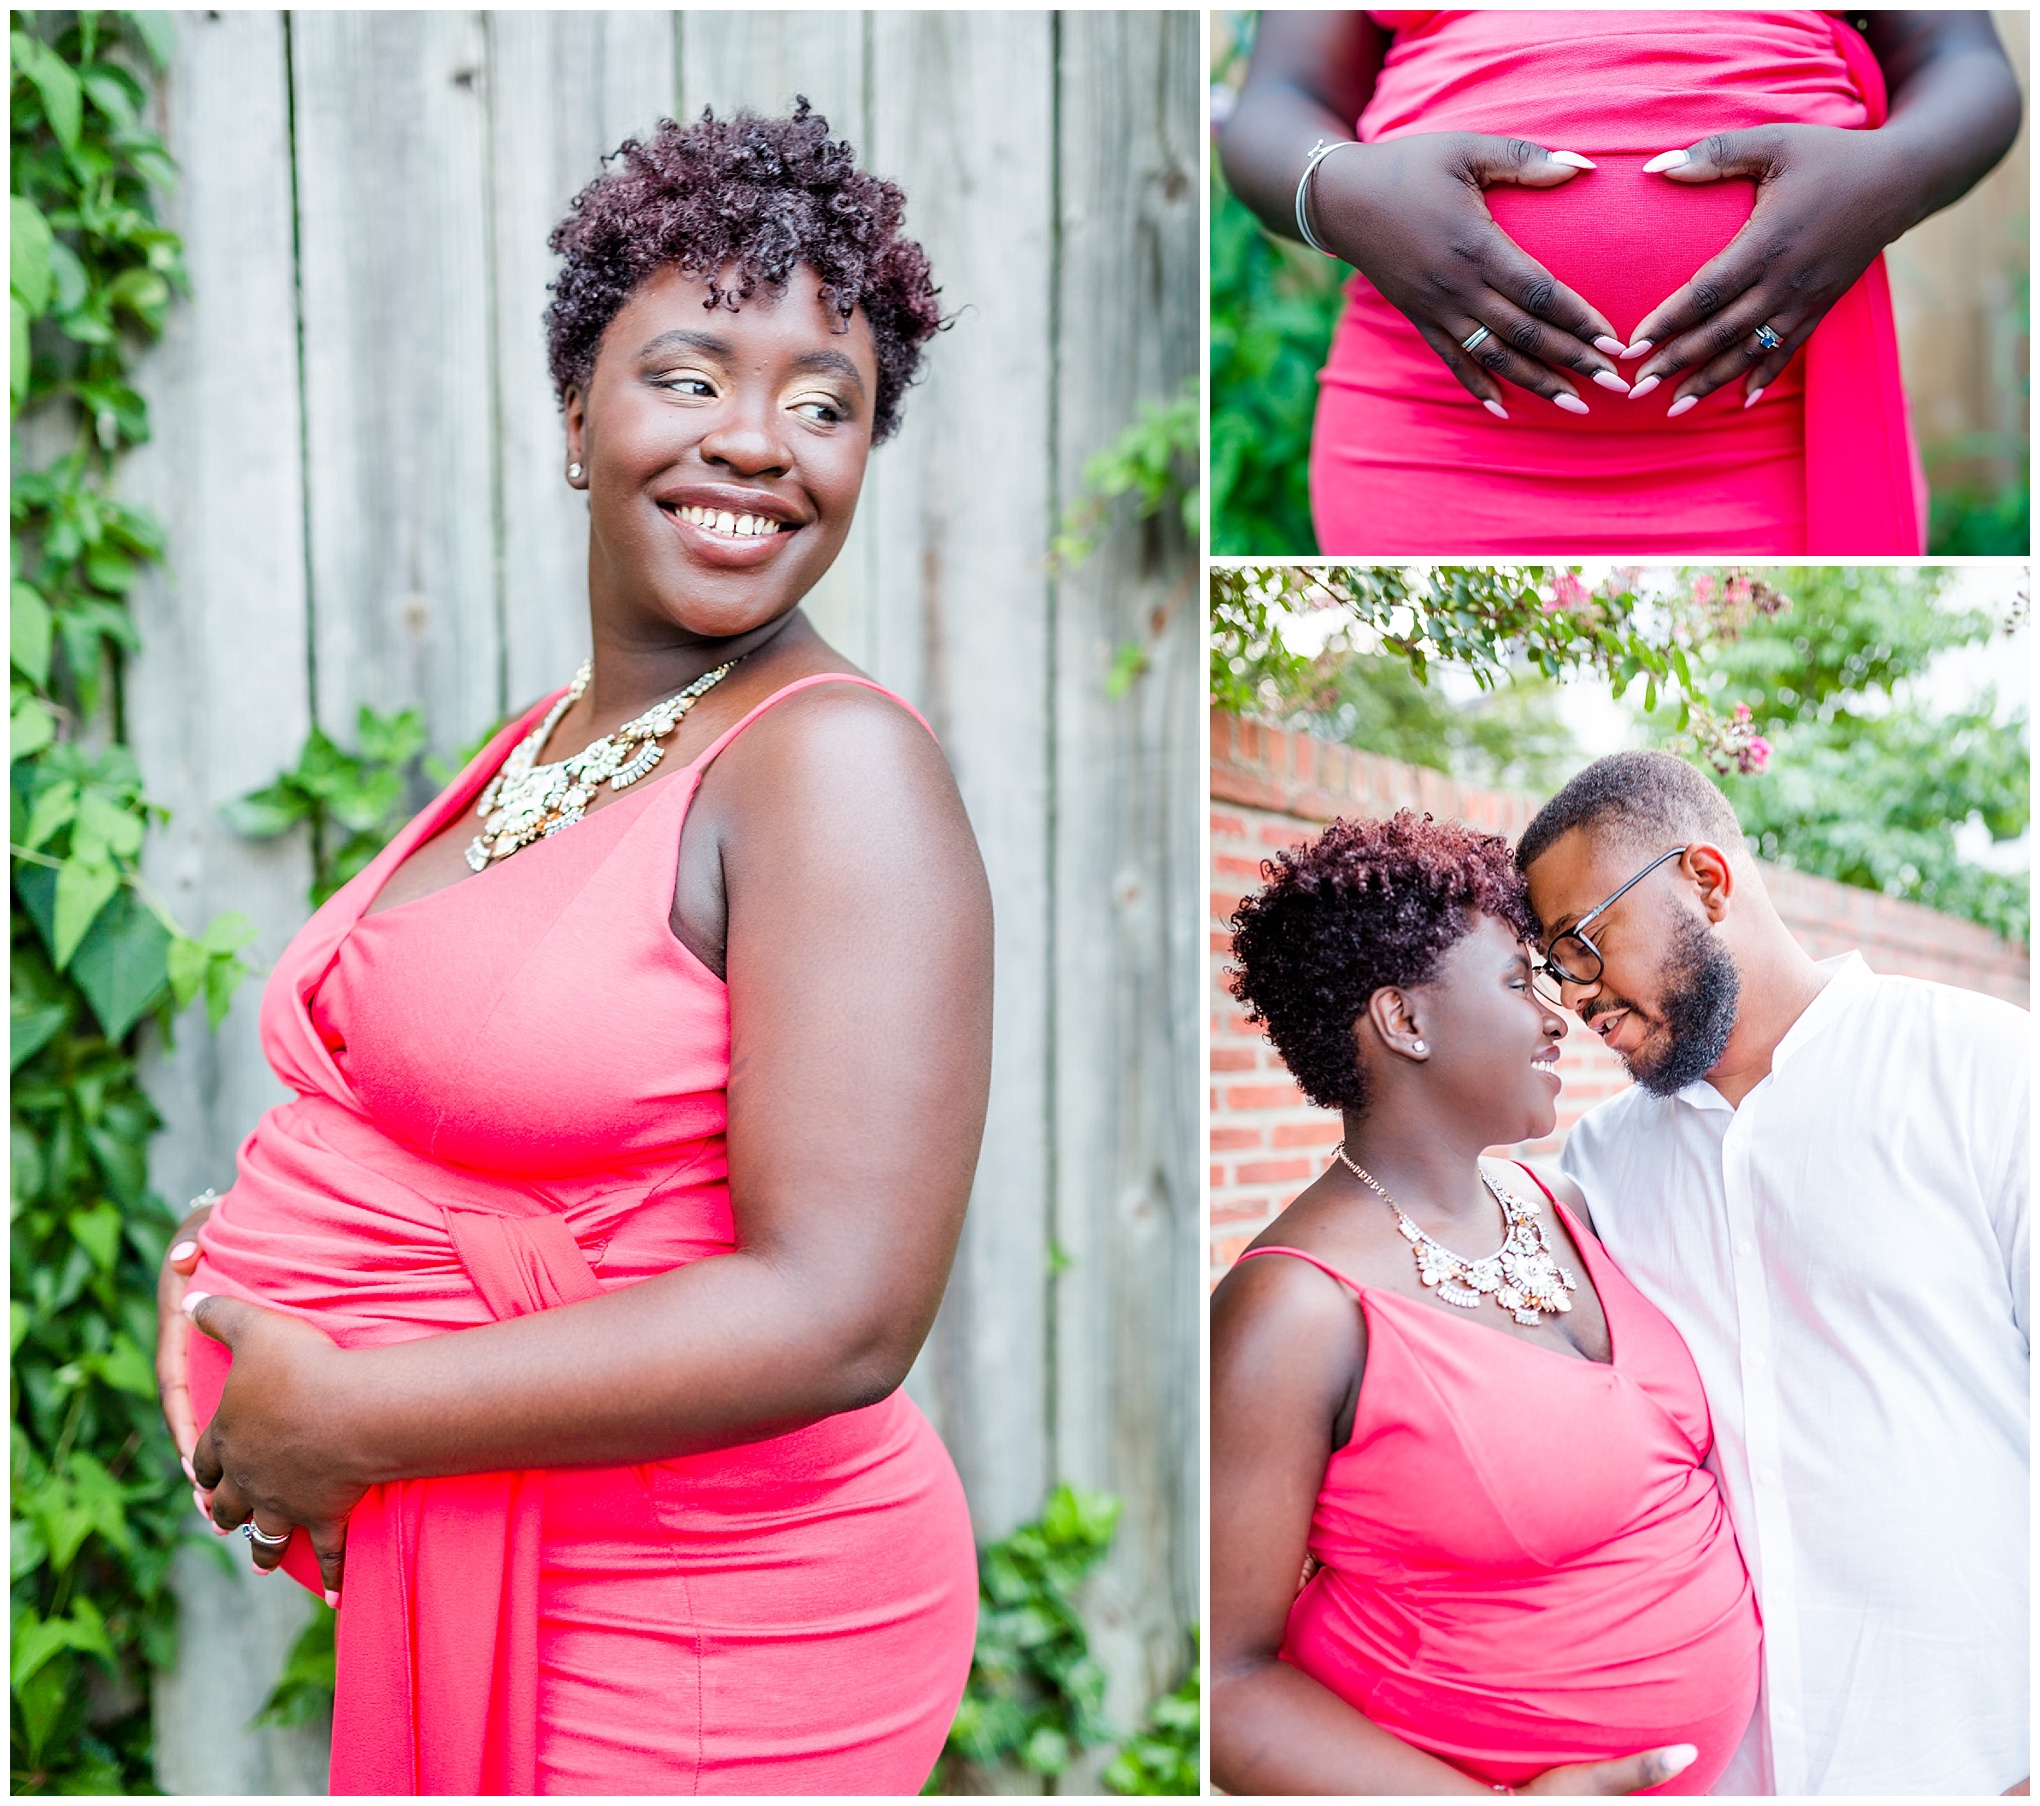 Wilkes Street Tunnel maternity photos, maternity style, coral dress, married couple, mom to be, dad to be, old town Alexandria, northern Virginia, maternity photographer, Alexandria maternity photographer, magic hour portraits, baby bump, heart shaped hands